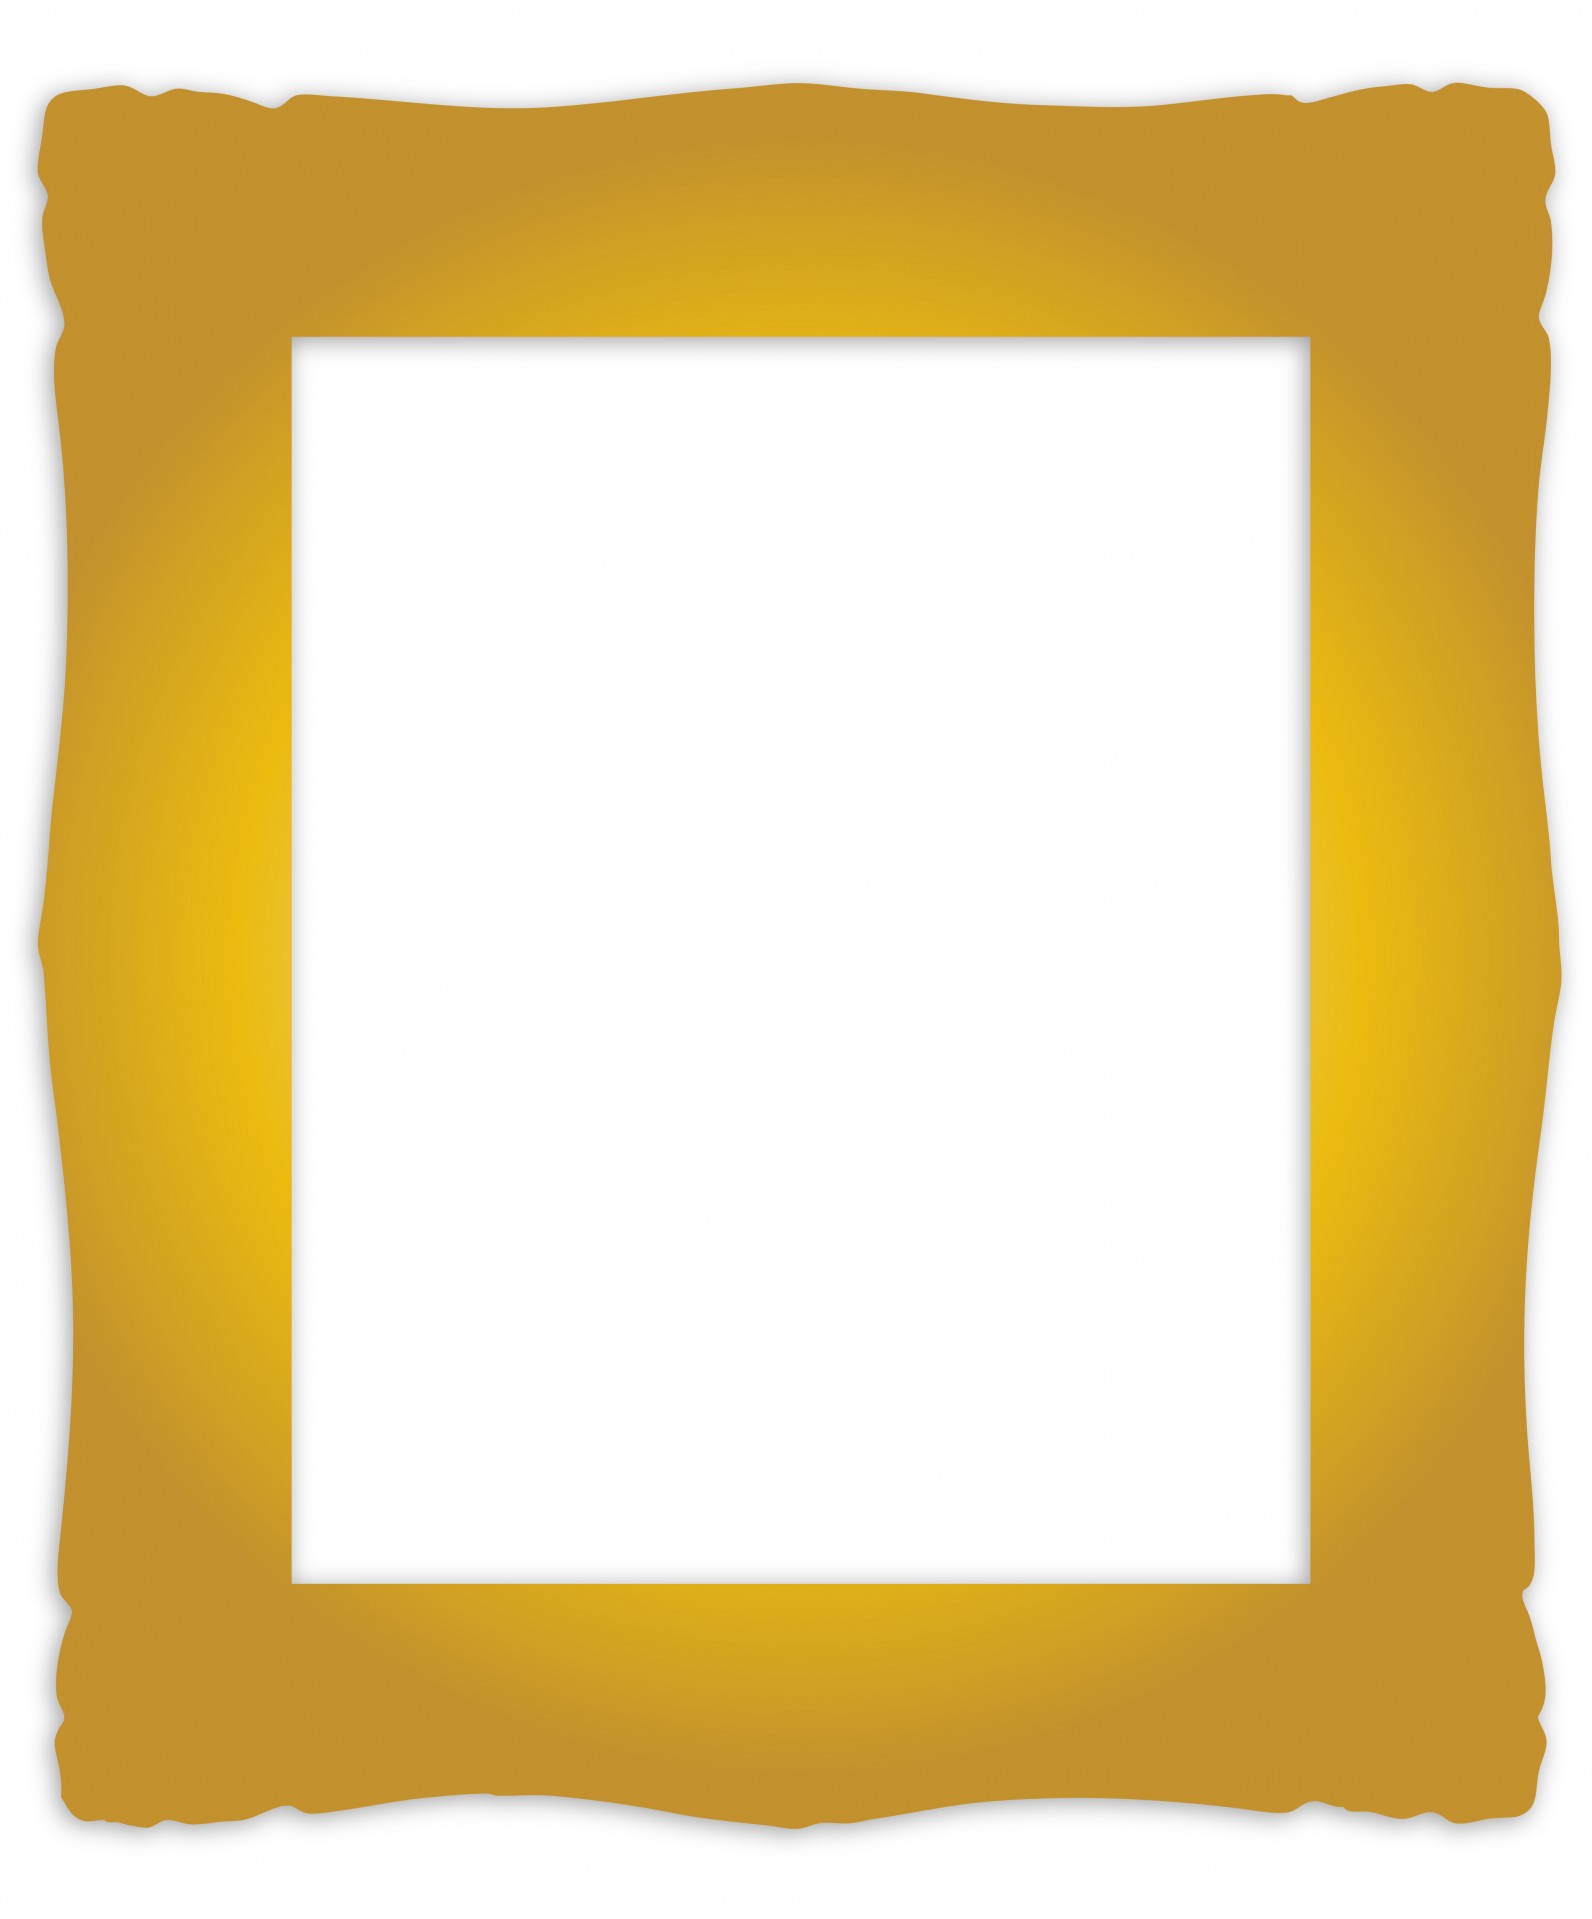 gold picture frames clip art free - photo #23